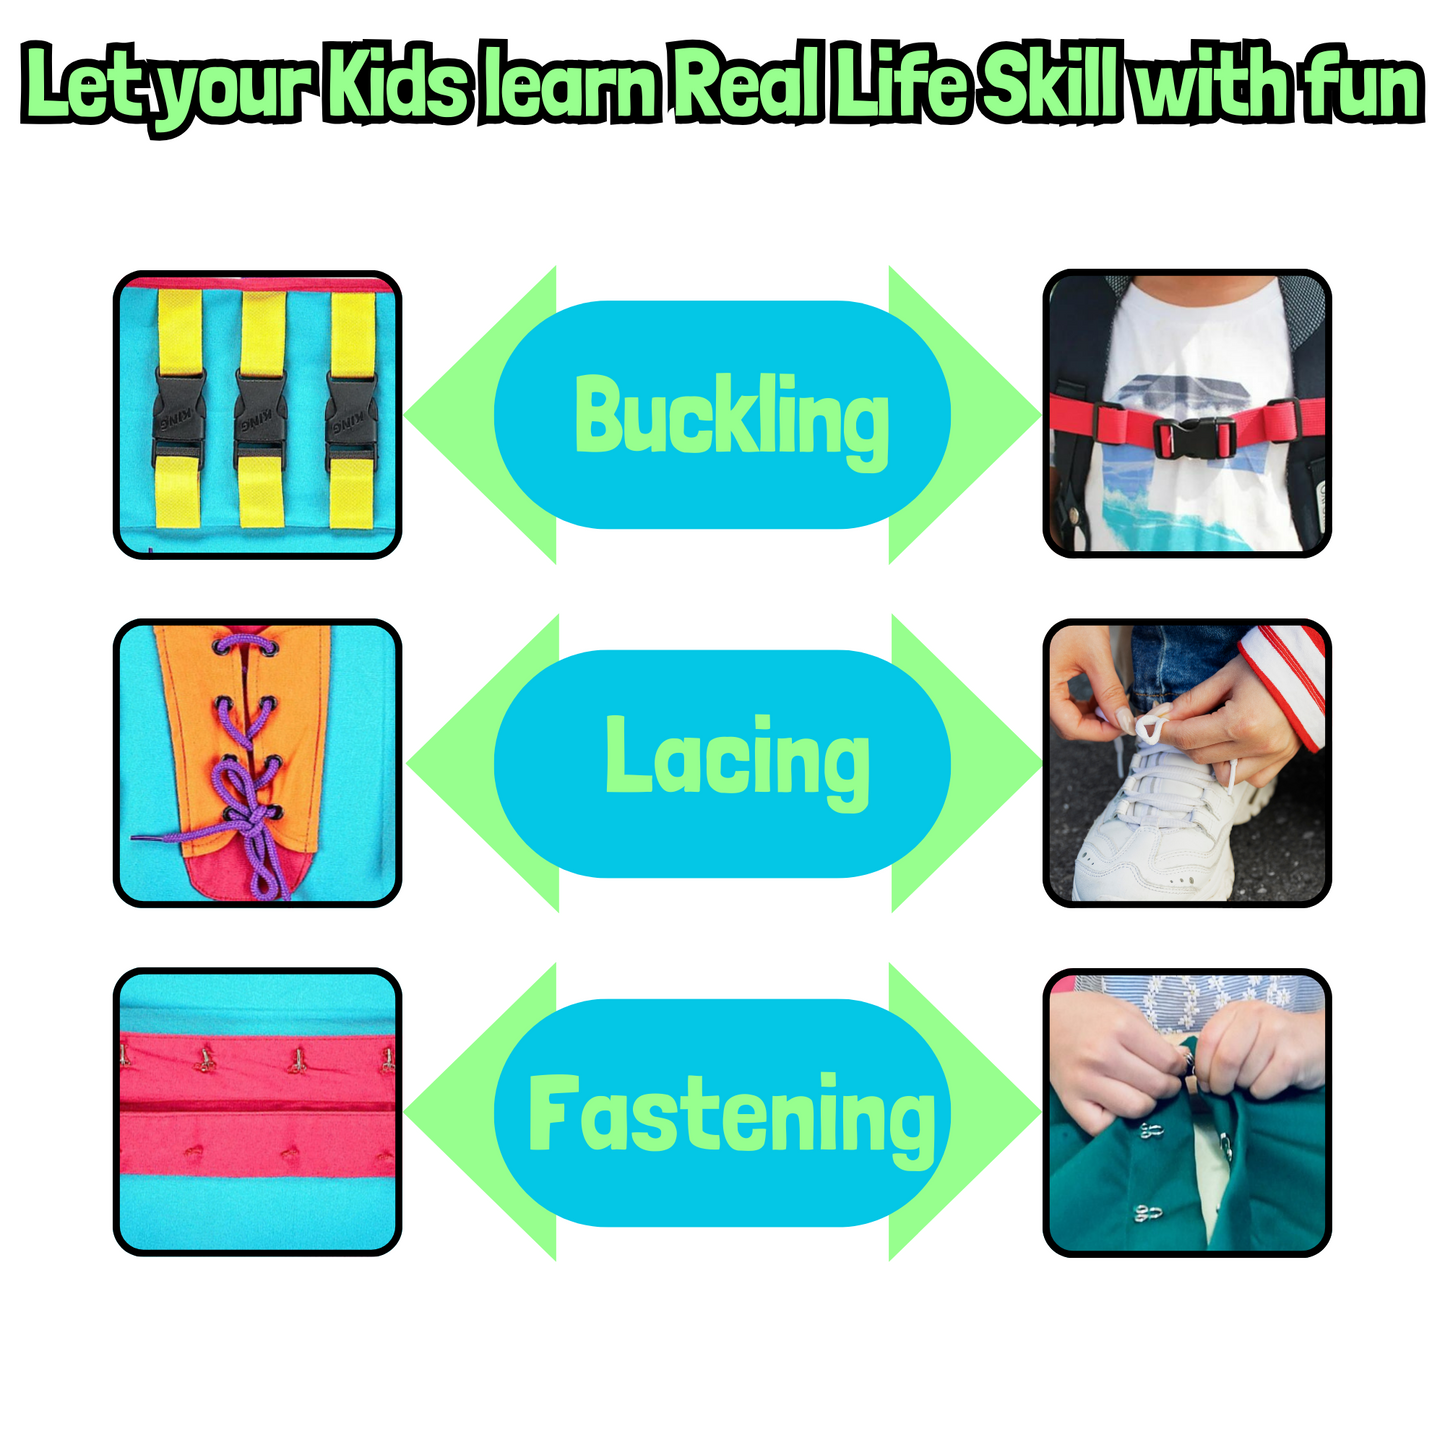 Basic Life Motor Skills Development Buckling and Lacing Toy for Kids